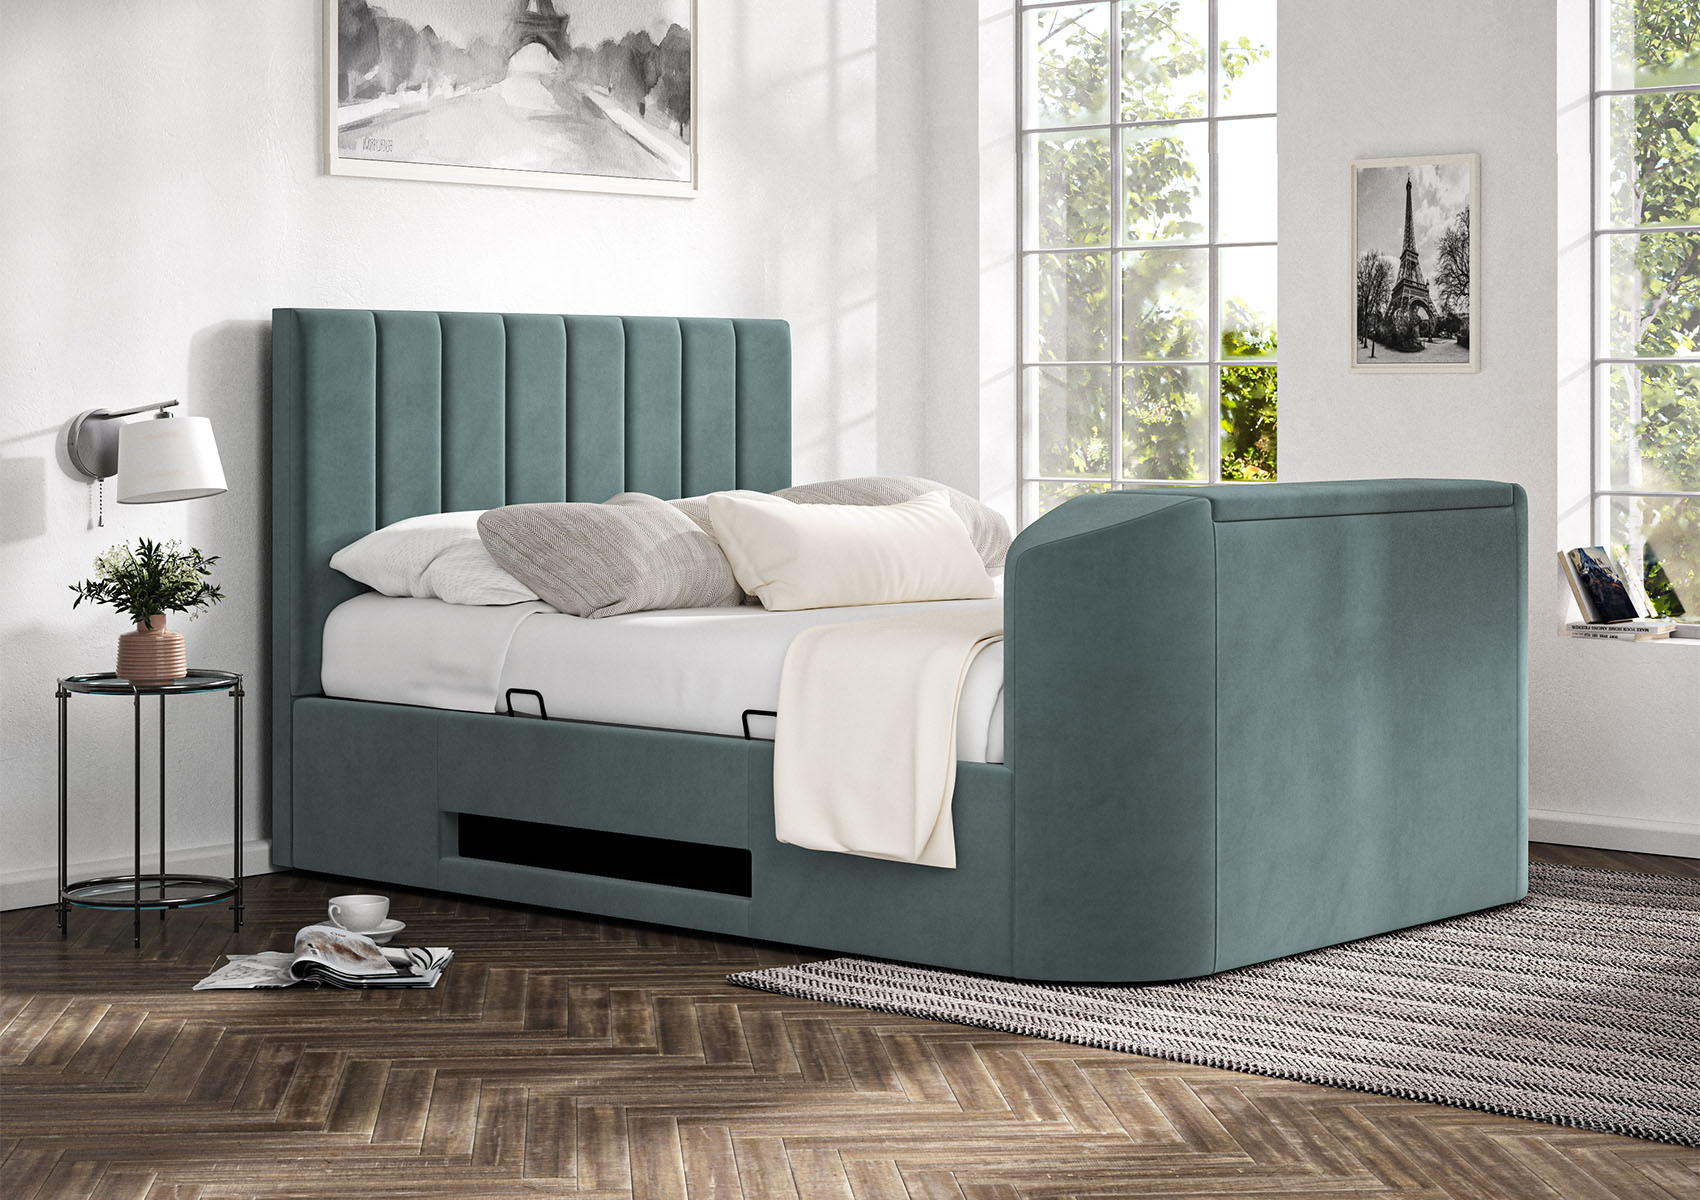 View Berkley Upholstered Eden Sea Grass Multifunctional Ottoman Smart TV Bed Bed Frame Only Time4Sleep information